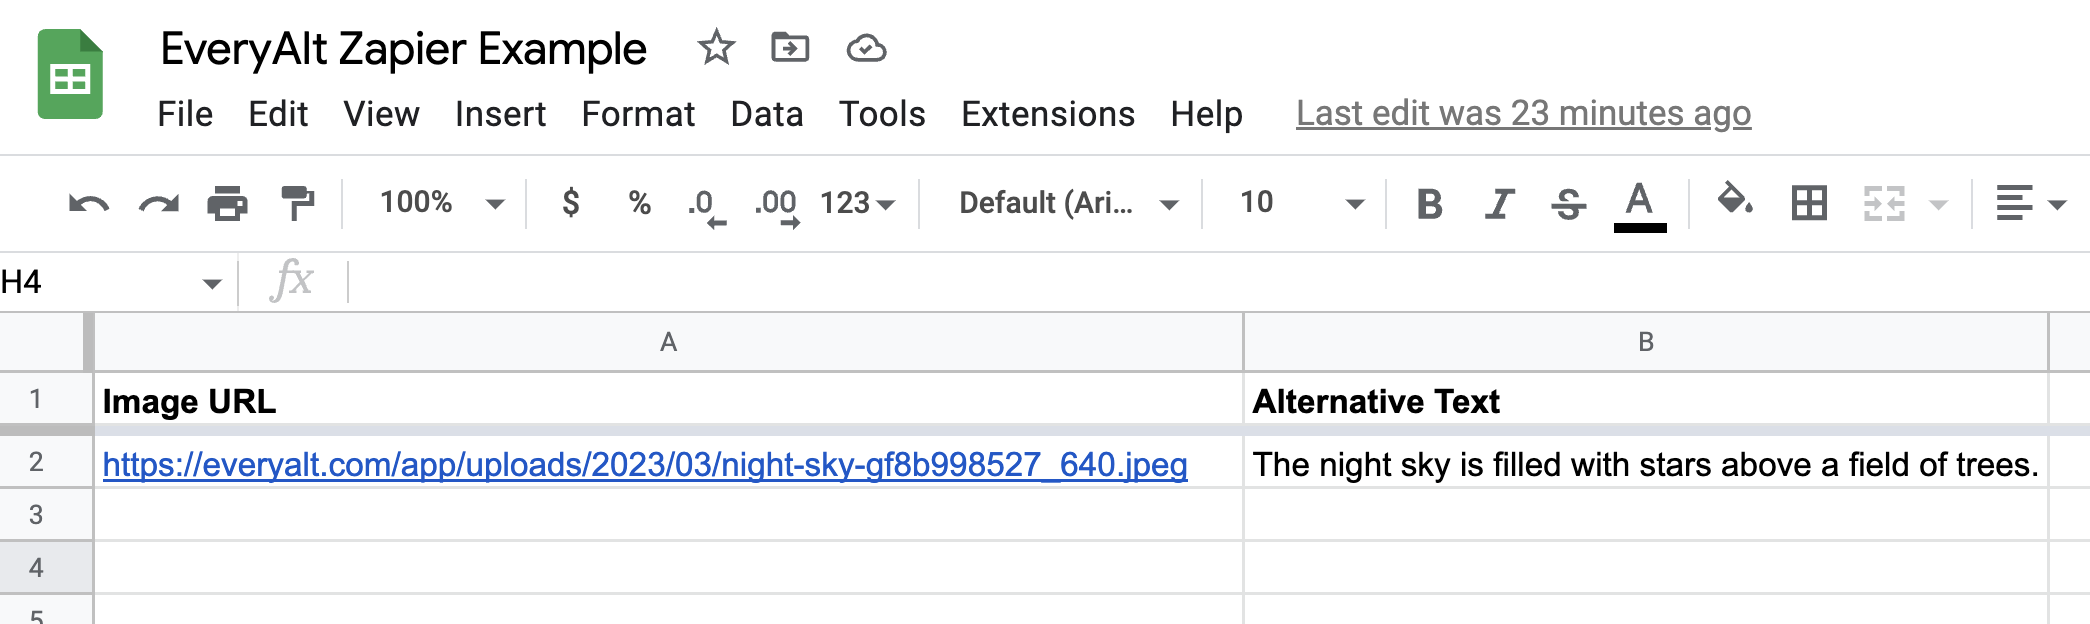 EveryAlt Zapier Example from Google Sheets; a spreadsheet with two columns